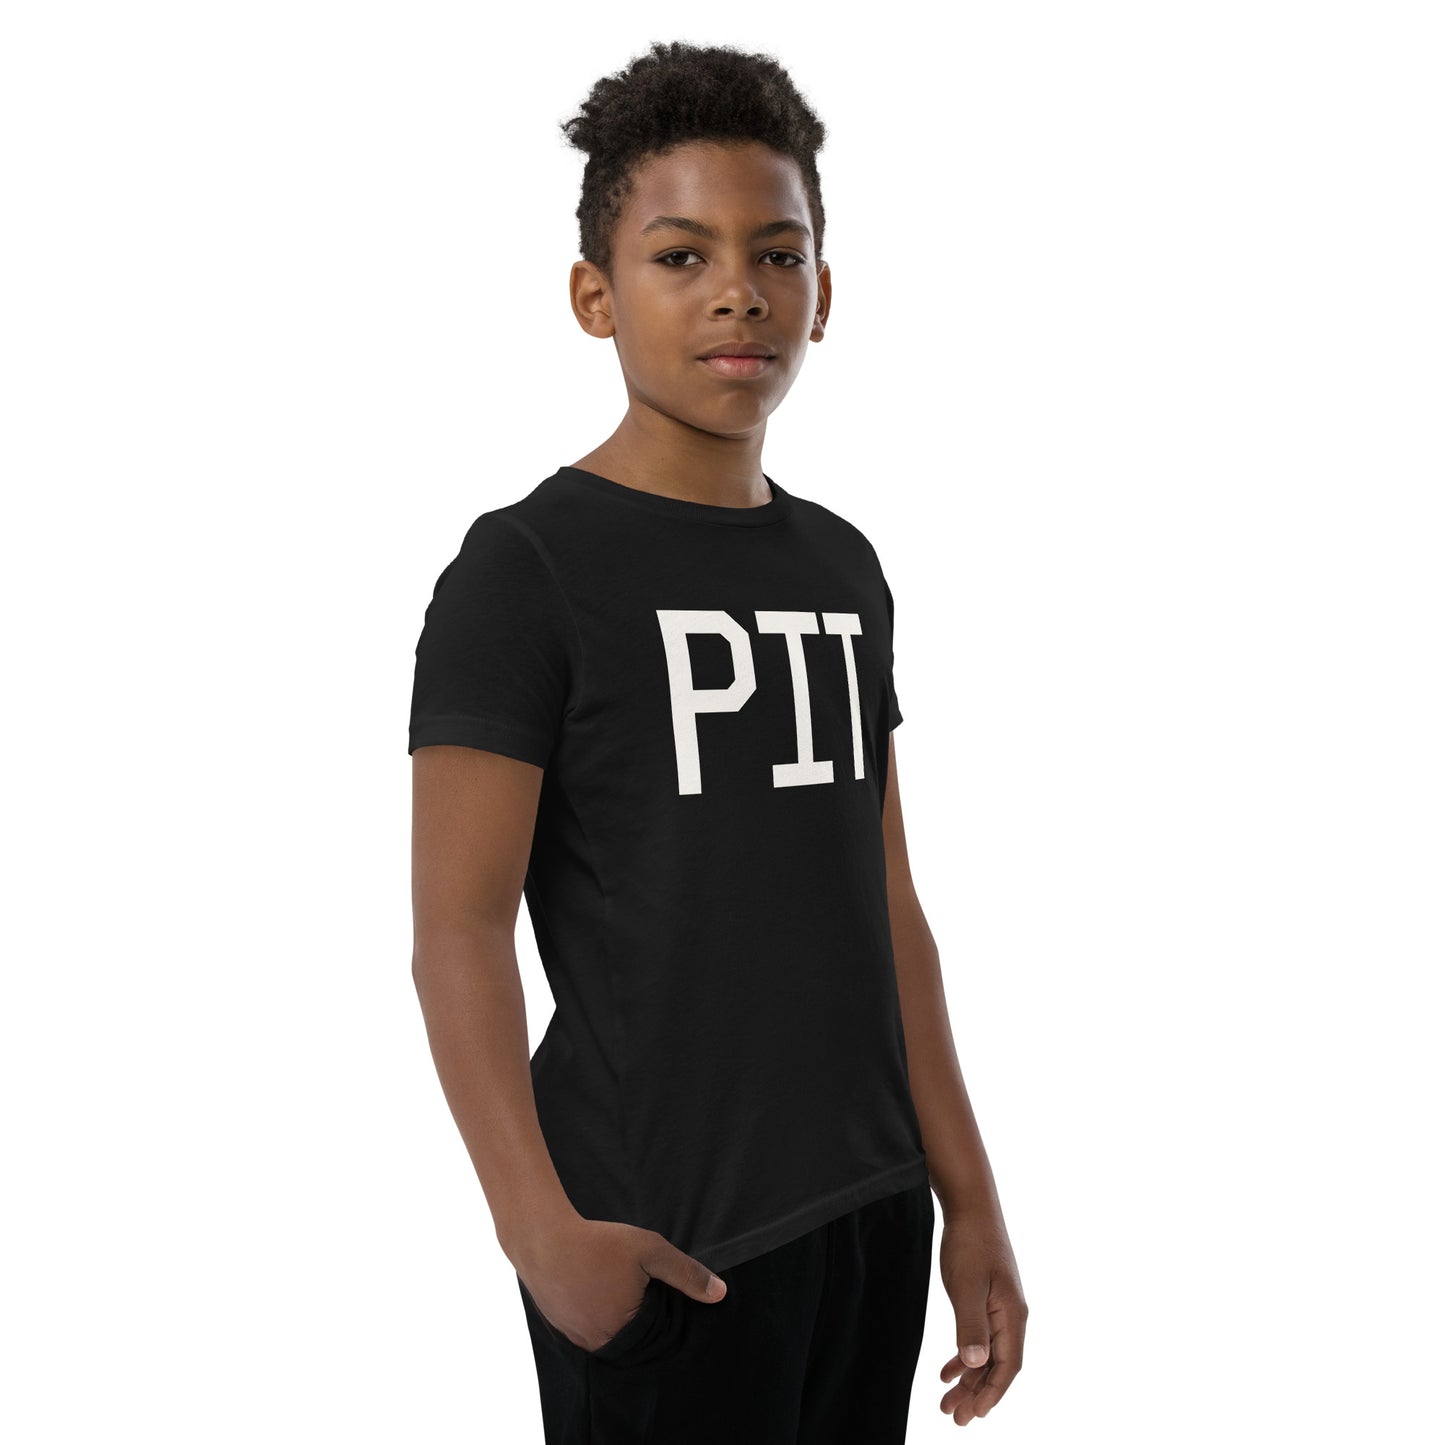 Kid's T-Shirt - White Graphic • PIT Pittsburgh • YHM Designs - Image 07